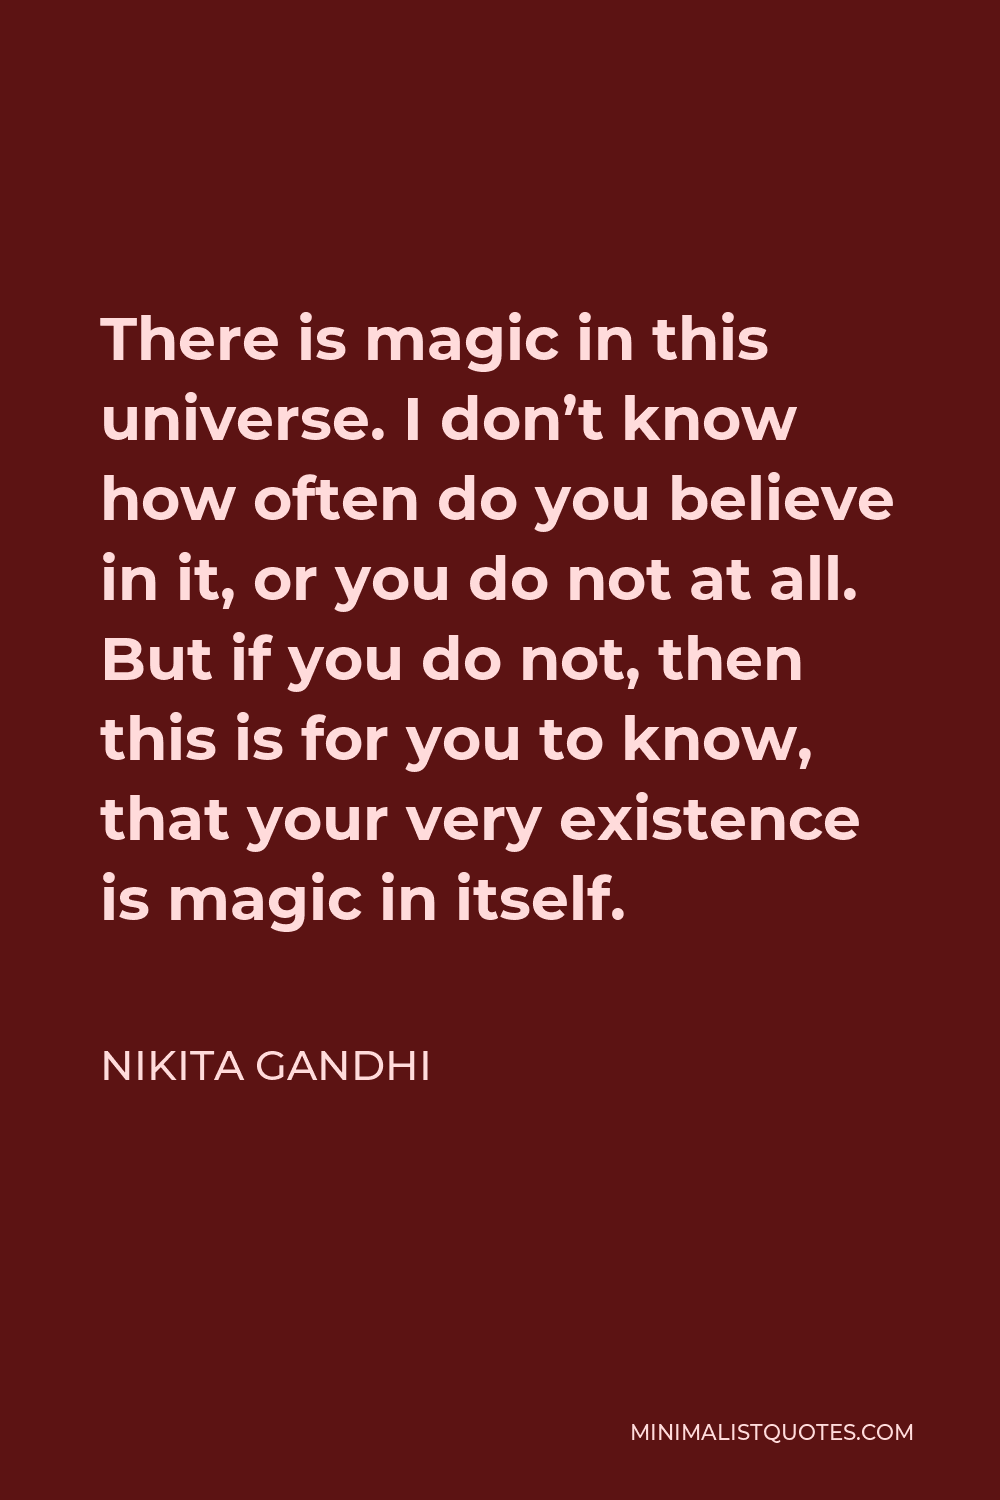 Nikita Gandhi Quote - There is magic in this universe. I don’t know how often do you believe in it, or you do not at all. But if you do not, then this is for you to know, that your very existence is magic in itself.